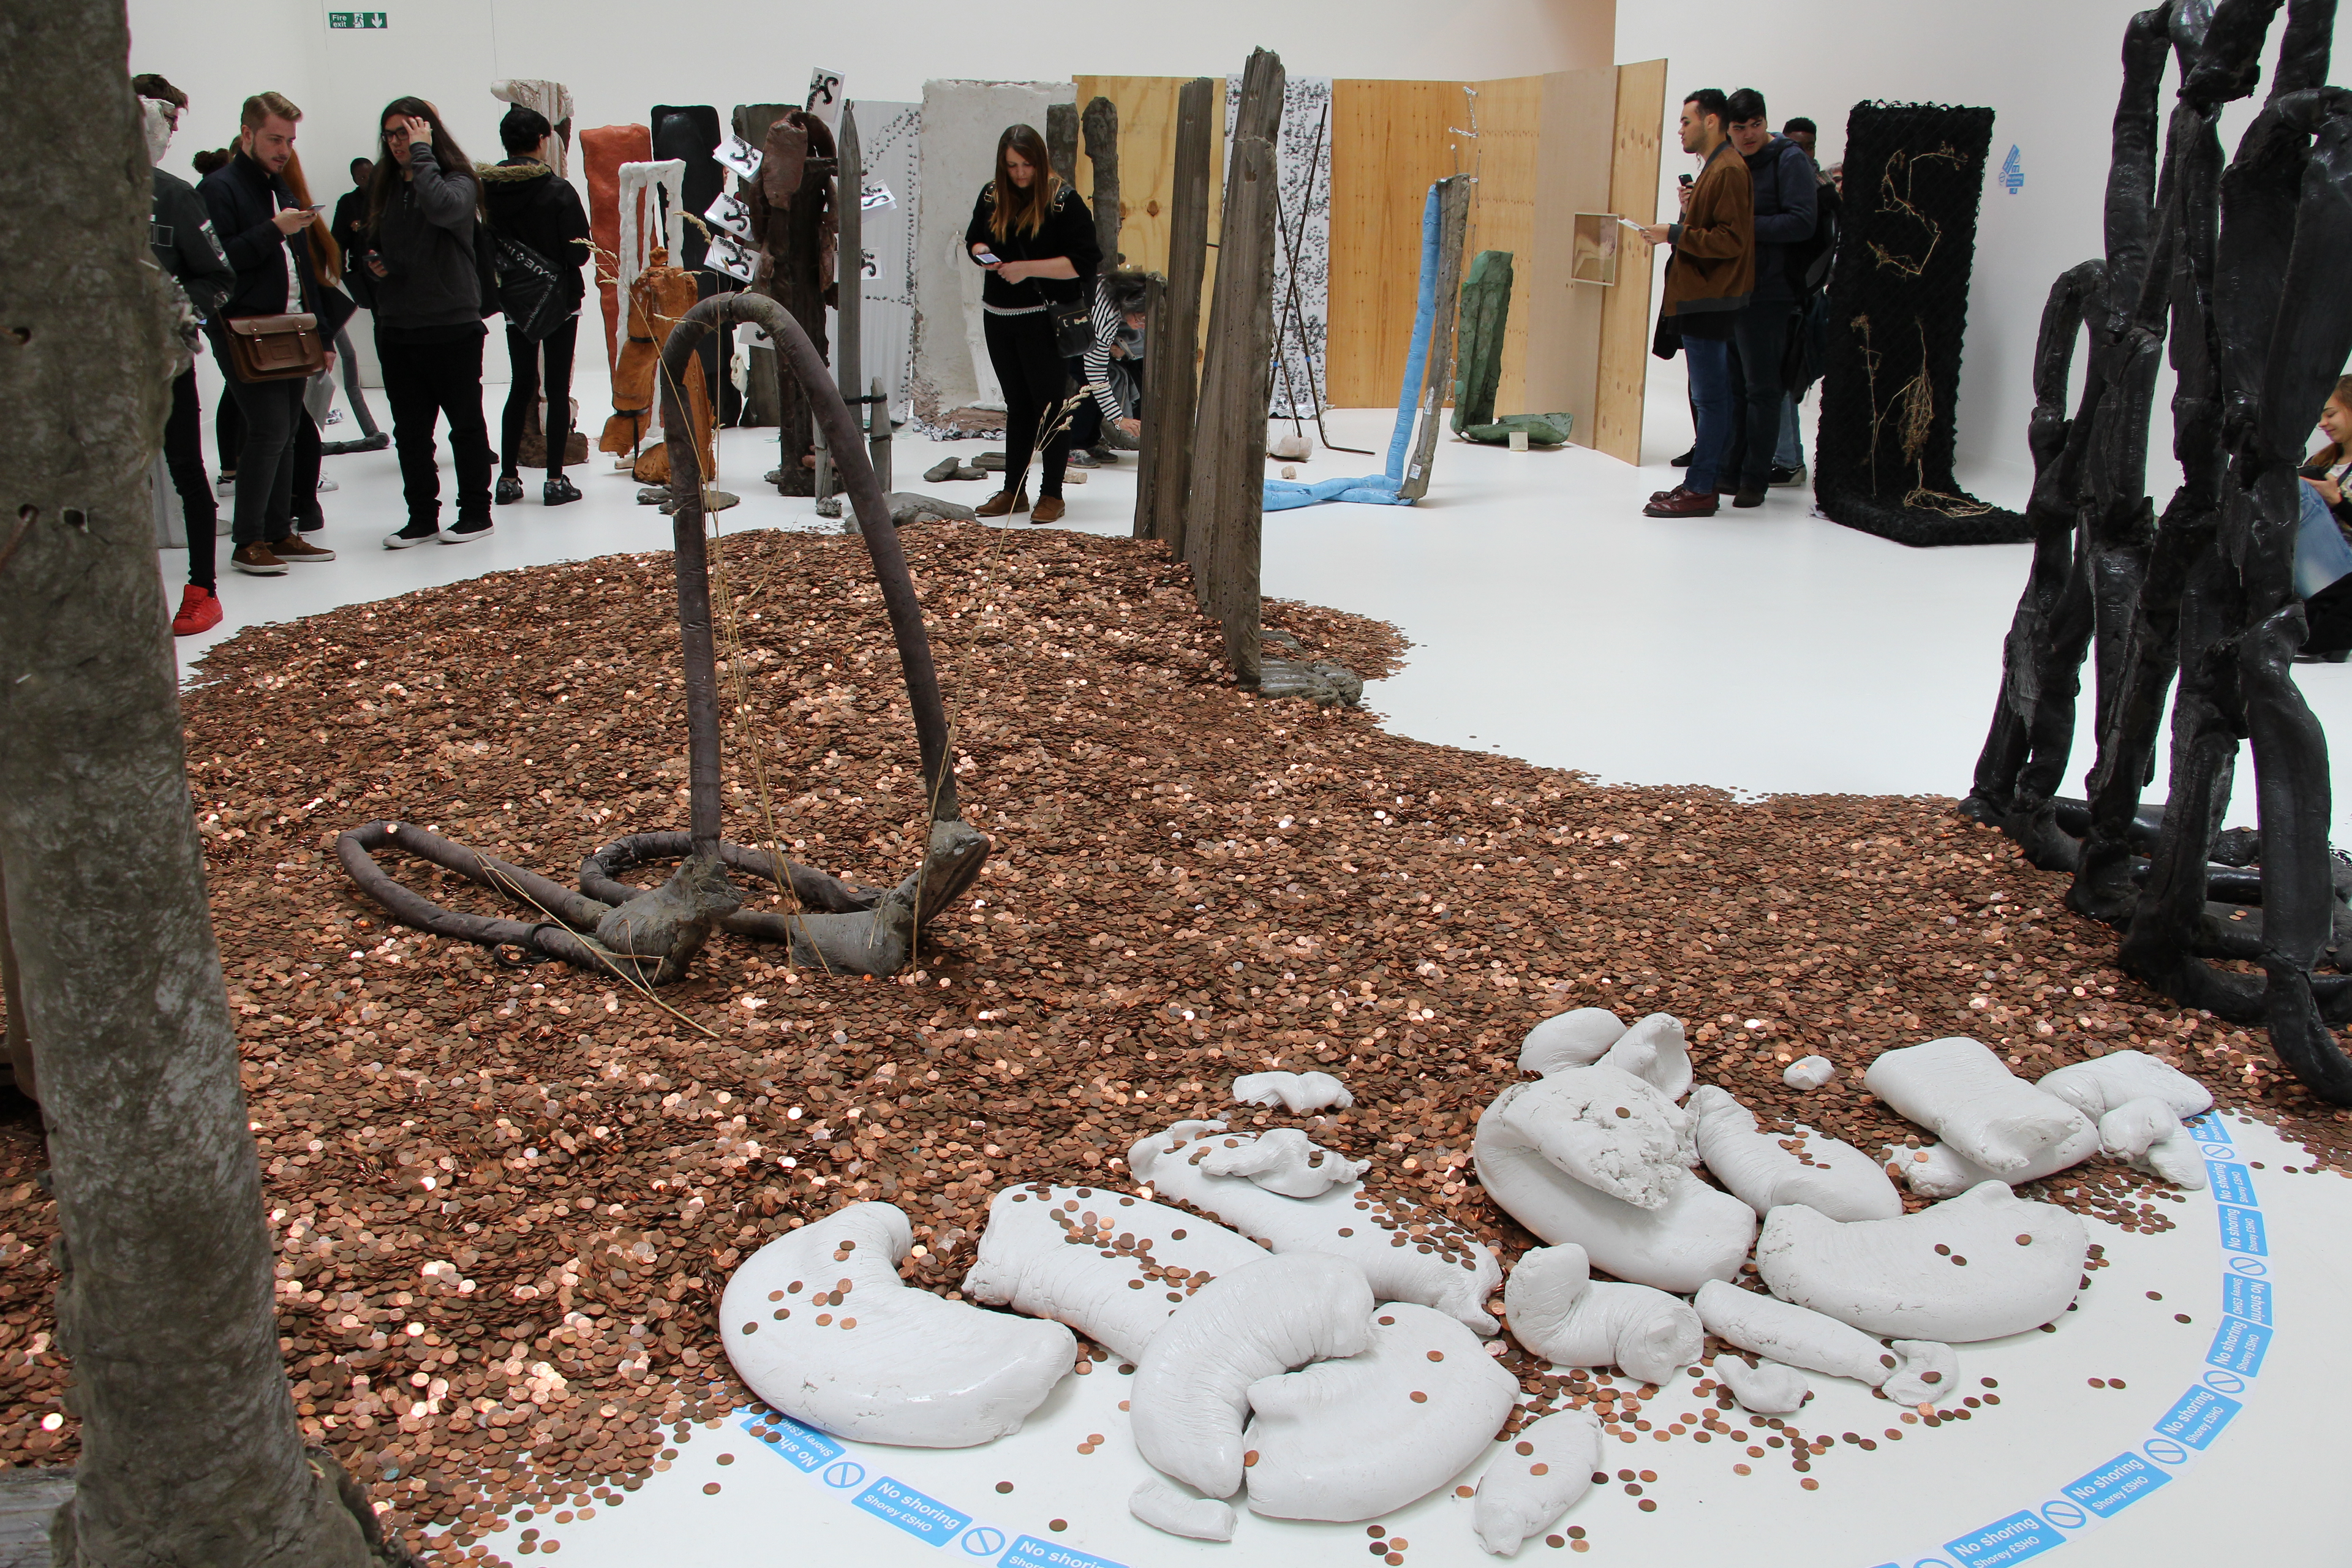 Several people can be seen admiring a group of artworks, including sculptures and thousands of pennies on the ground.